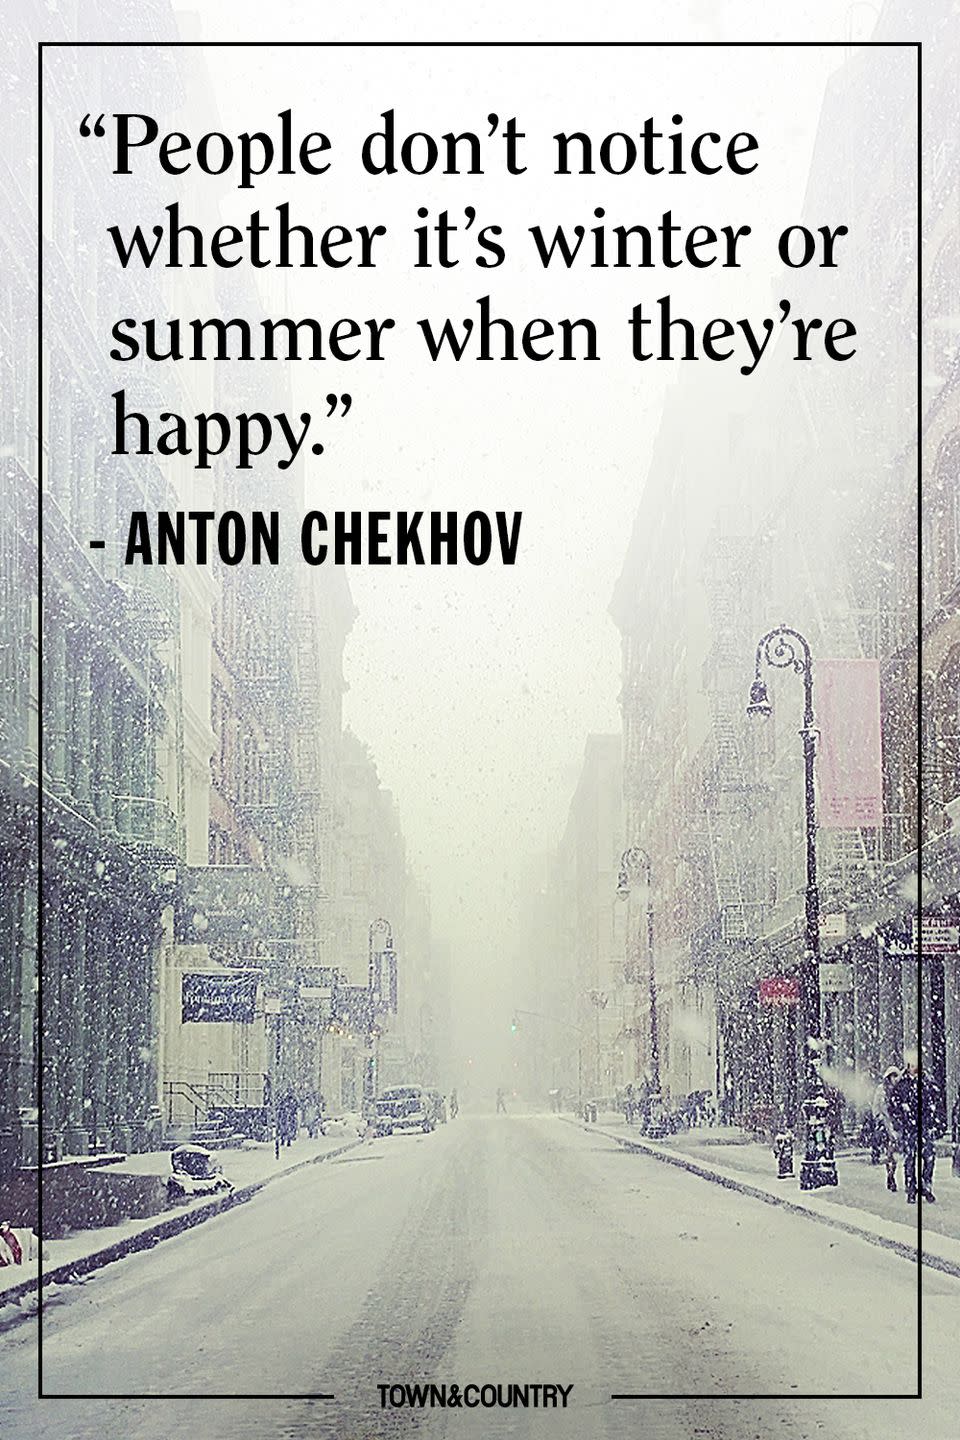 <p>"People don’t notice whether it’s winter or summer when they’re happy."<br></p><p><em>- Anton Chekhov</em></p>